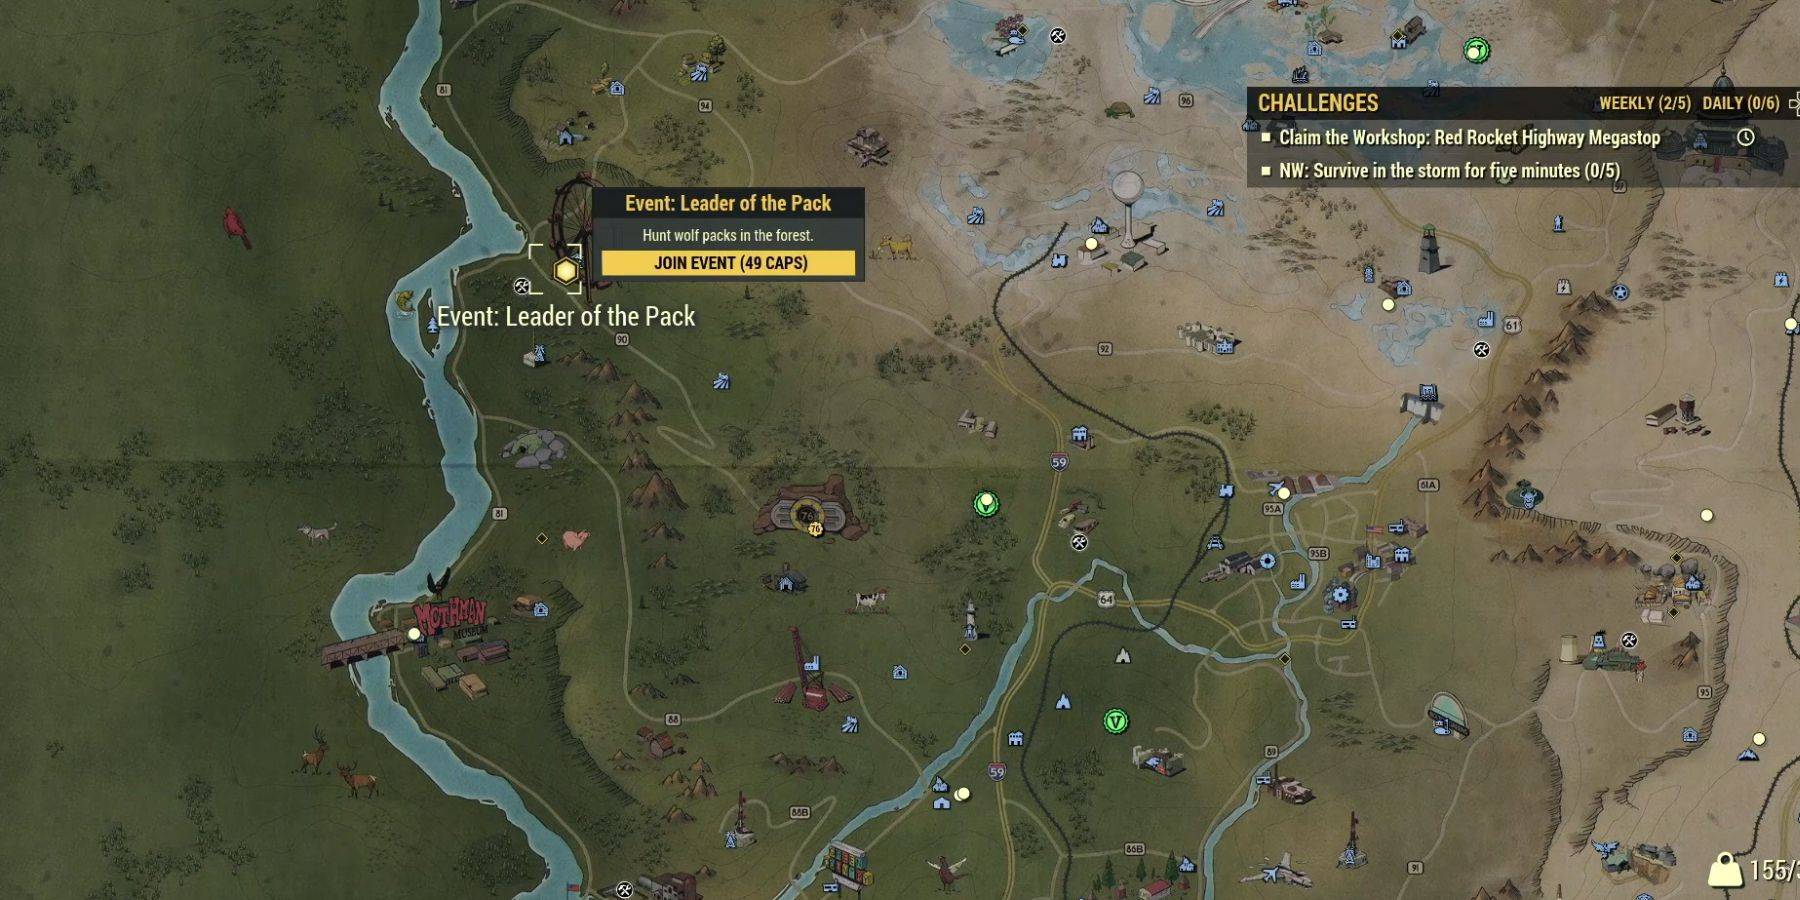 Where to find wolves in fallout 76